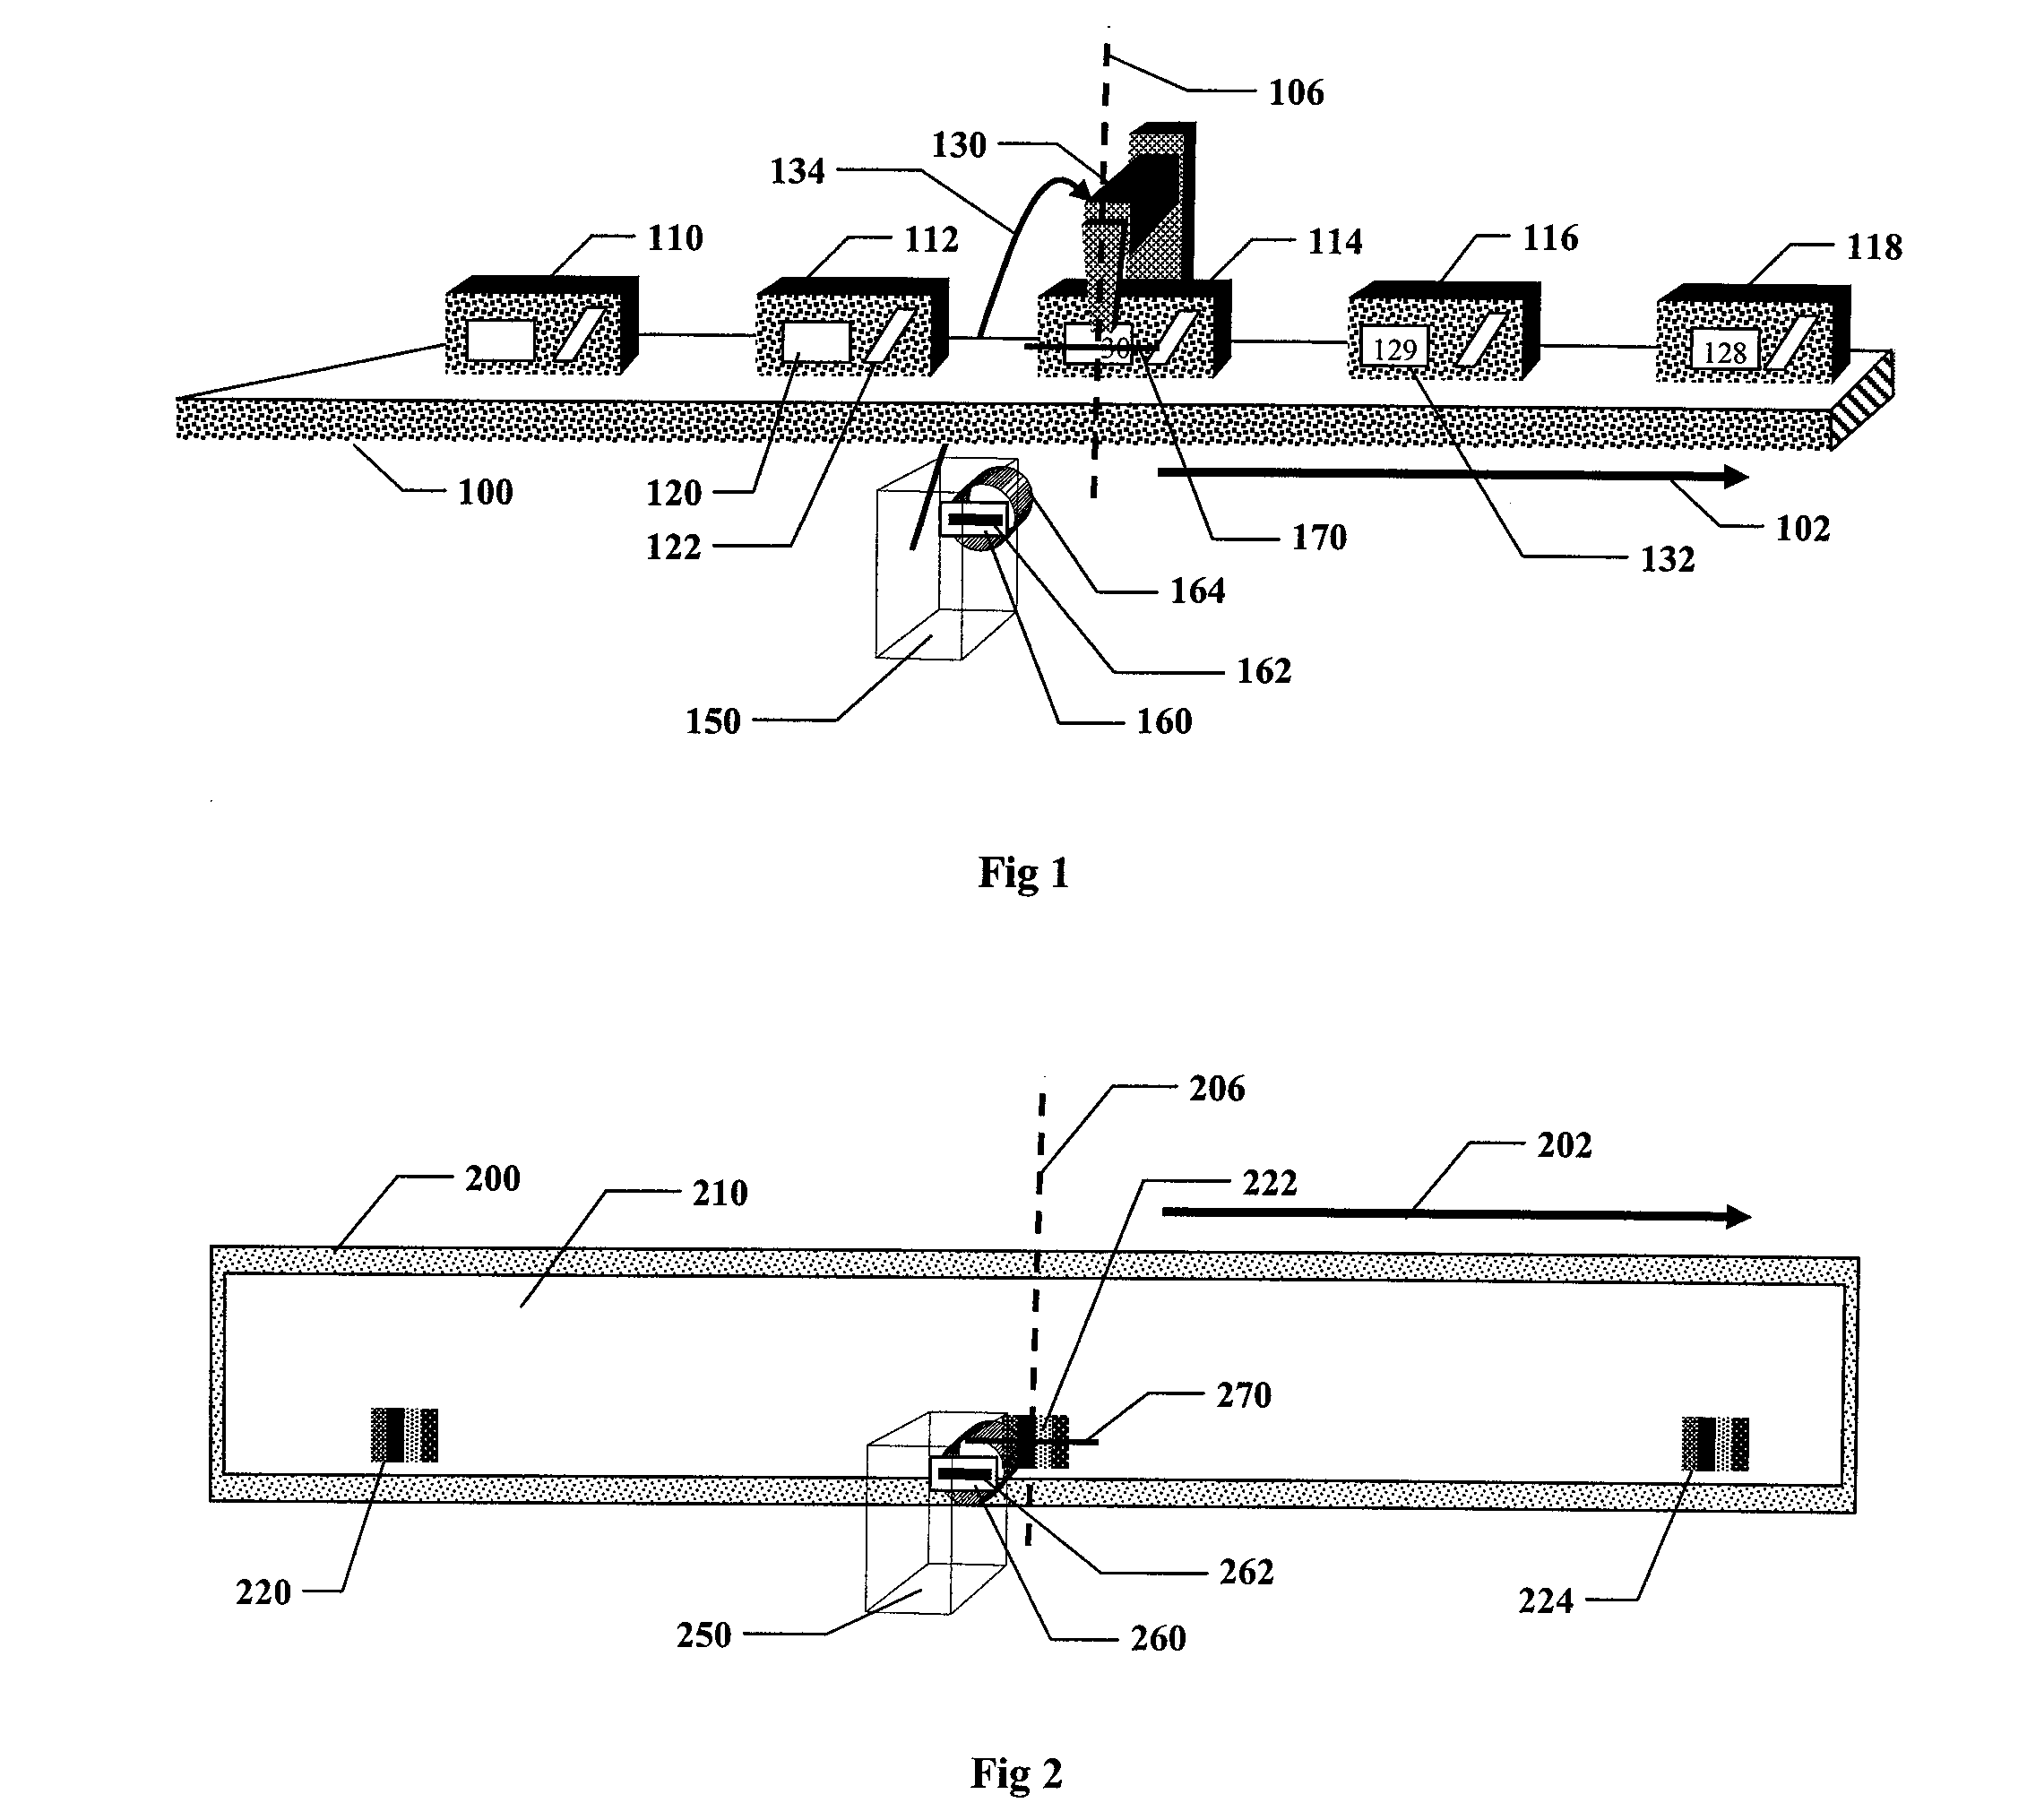 Method and System for Optoelectronic Detection and Location of Objects